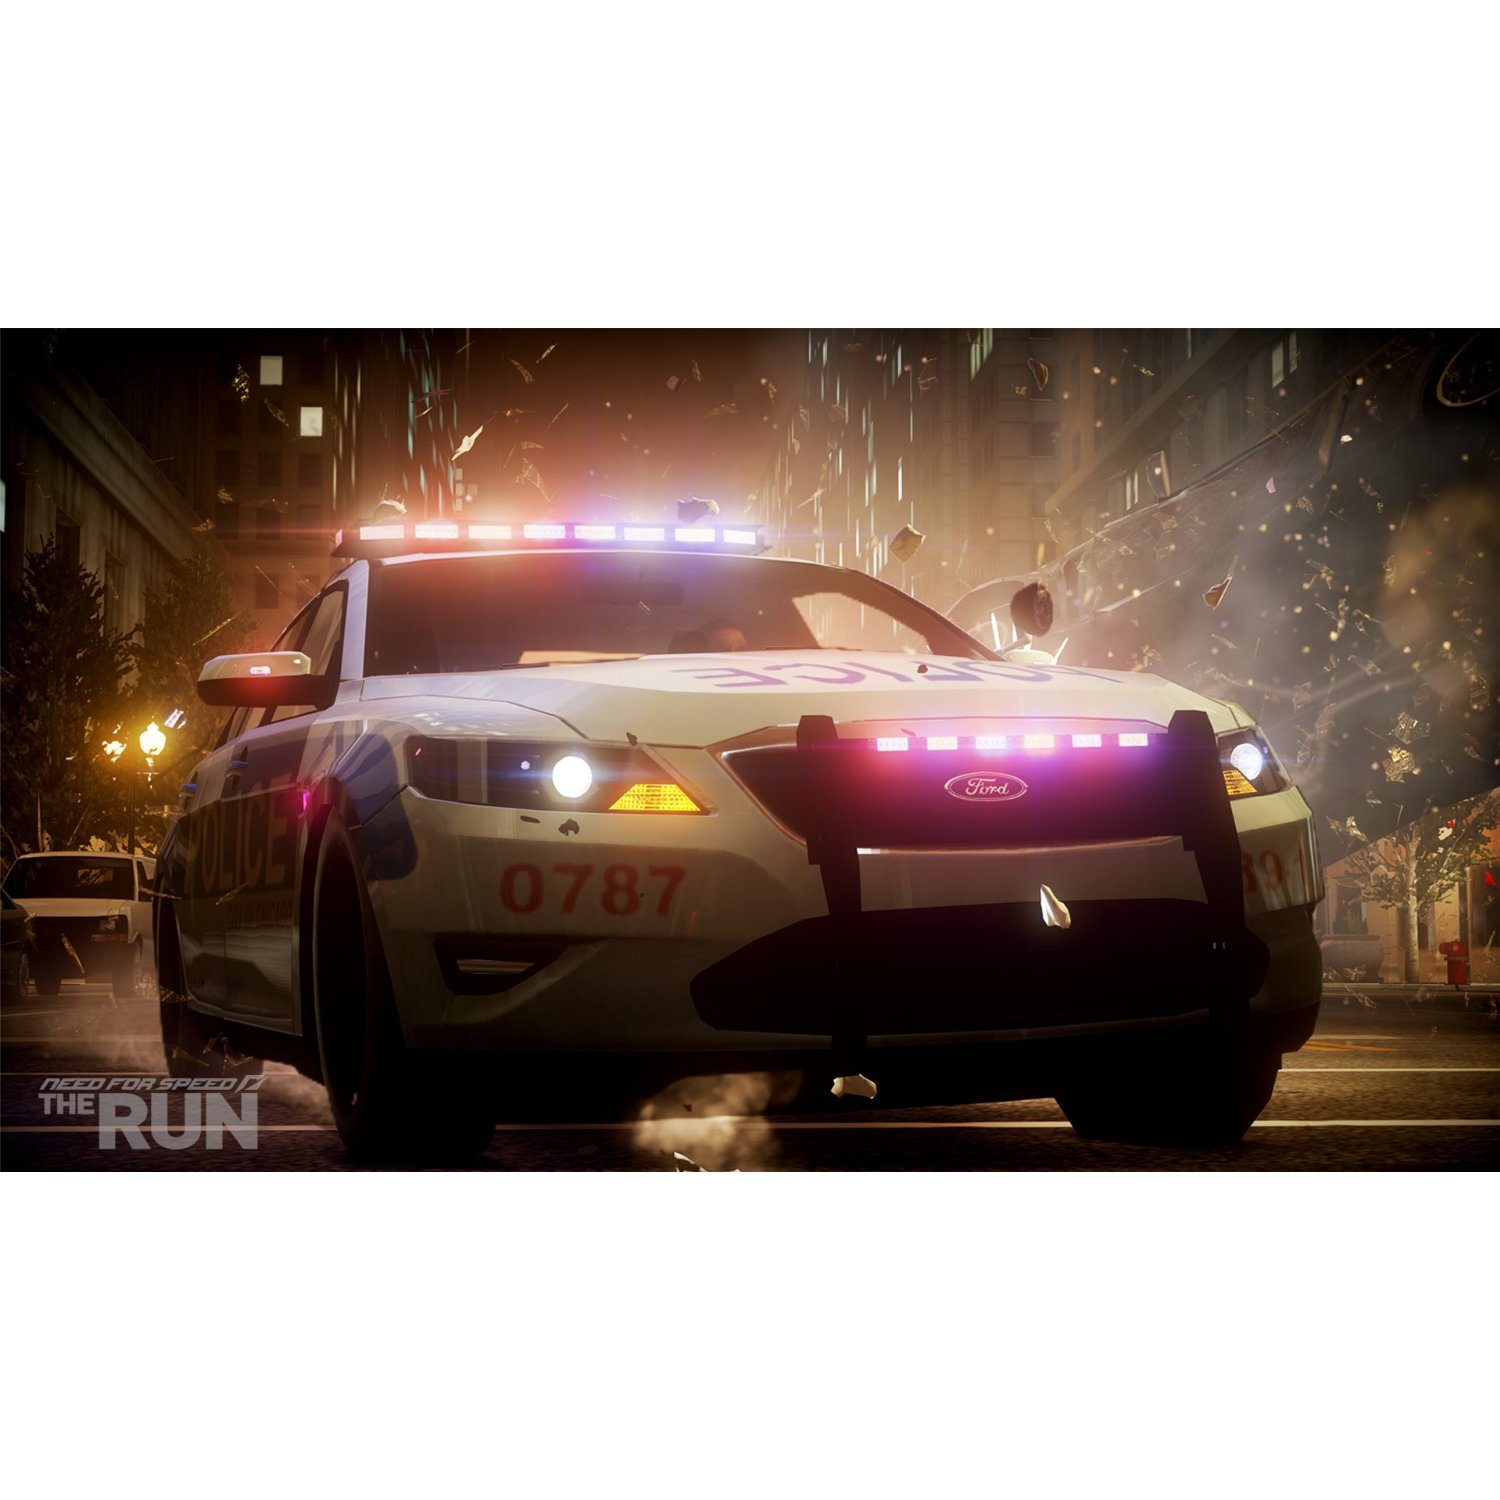 http://thetechjournal.com/wp-content/uploads/images/1109/1316267211-need-for-speed-the-run--game-review-9.jpg